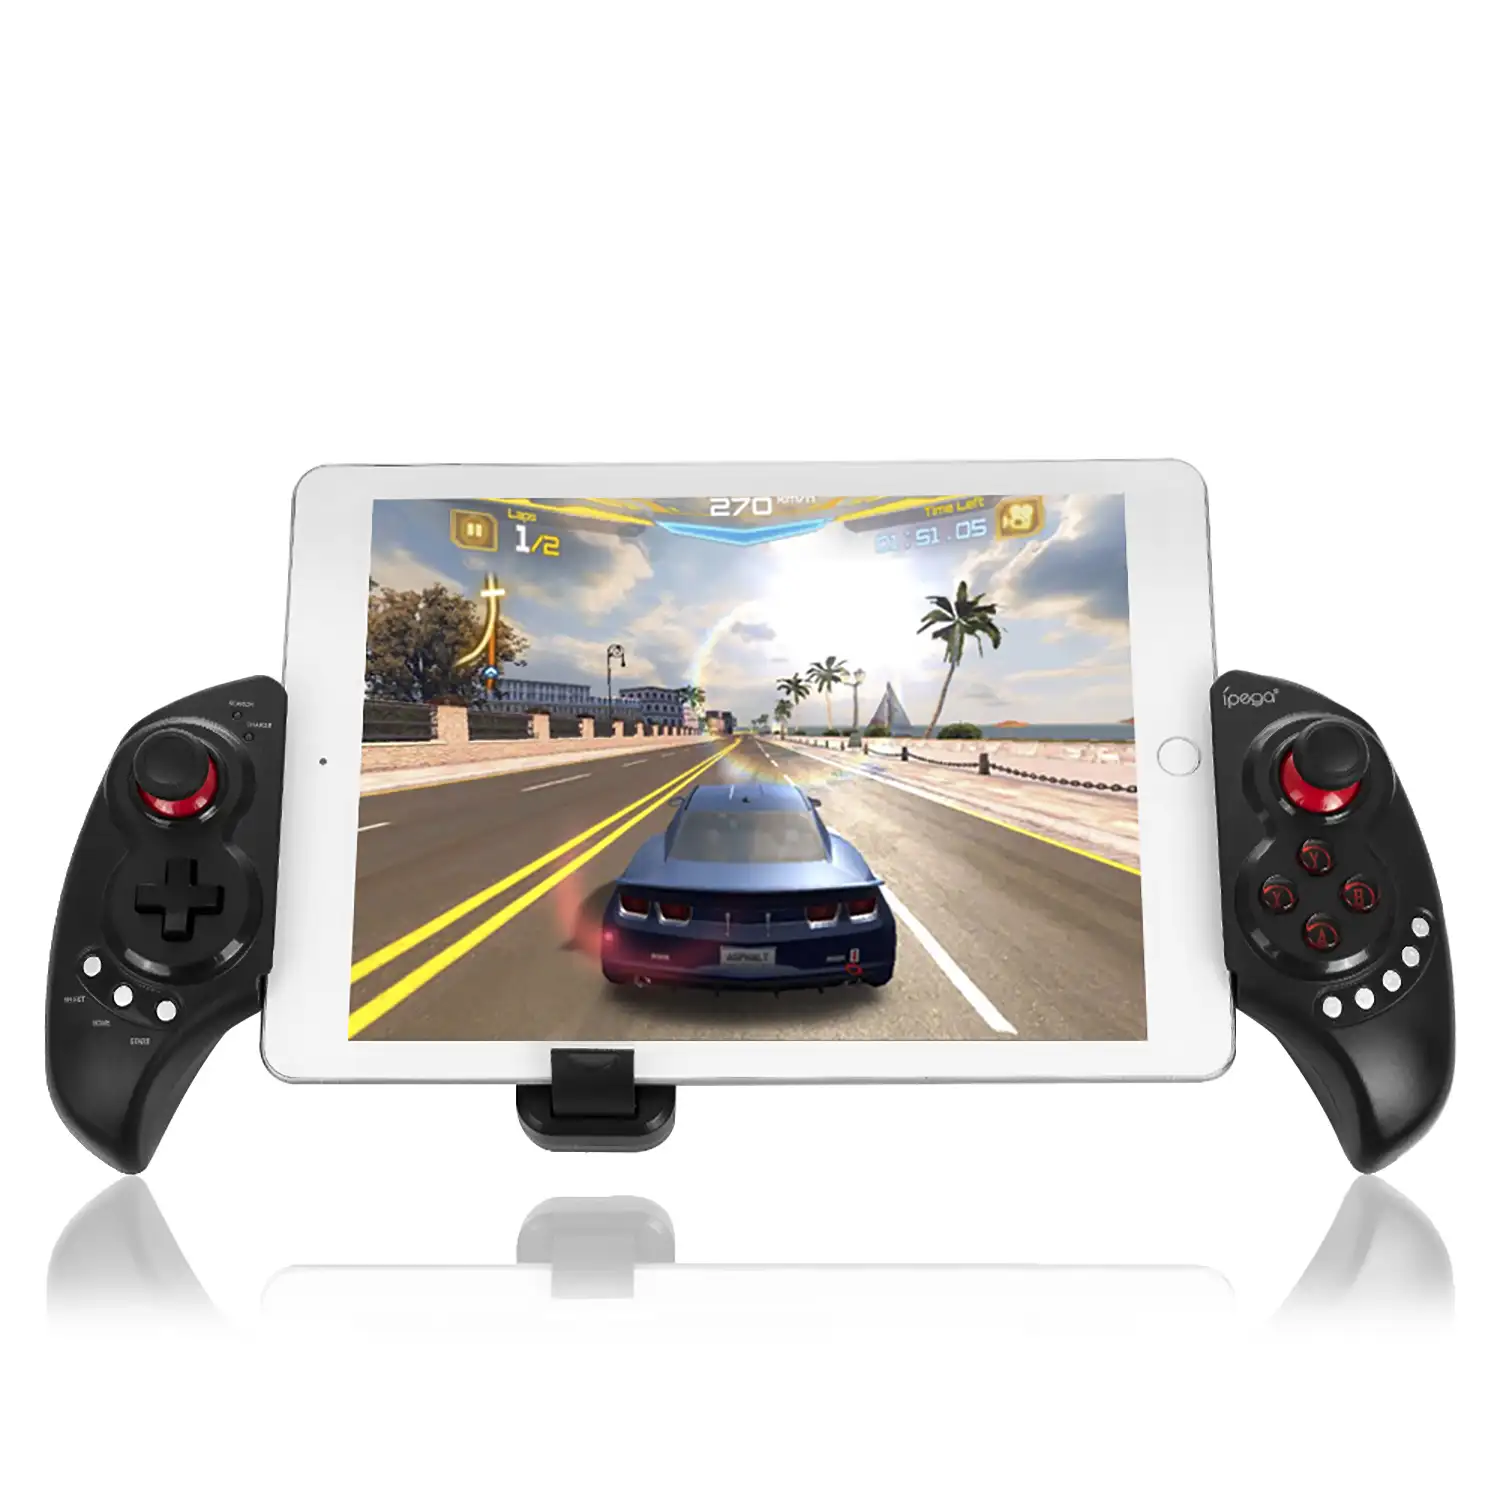 Gamepad Bluetooth extensible, con stand central, para Smartphones, Tablets y PC